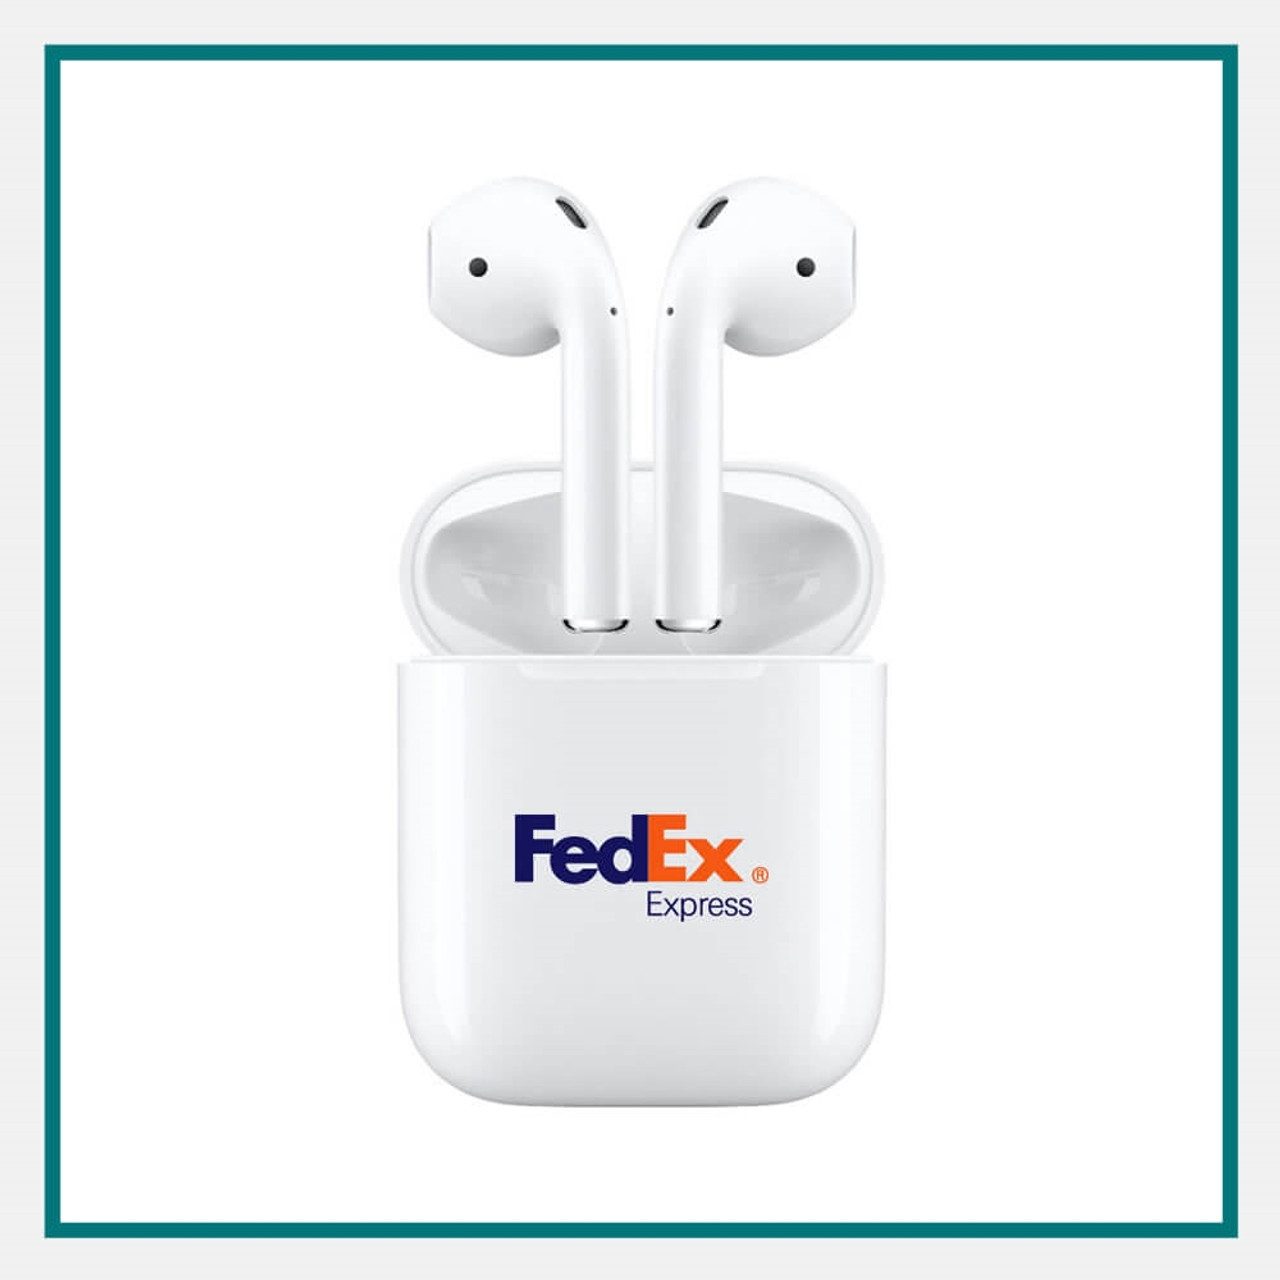 Apple Wireless Charging Case for AirPods (2nd Gen)